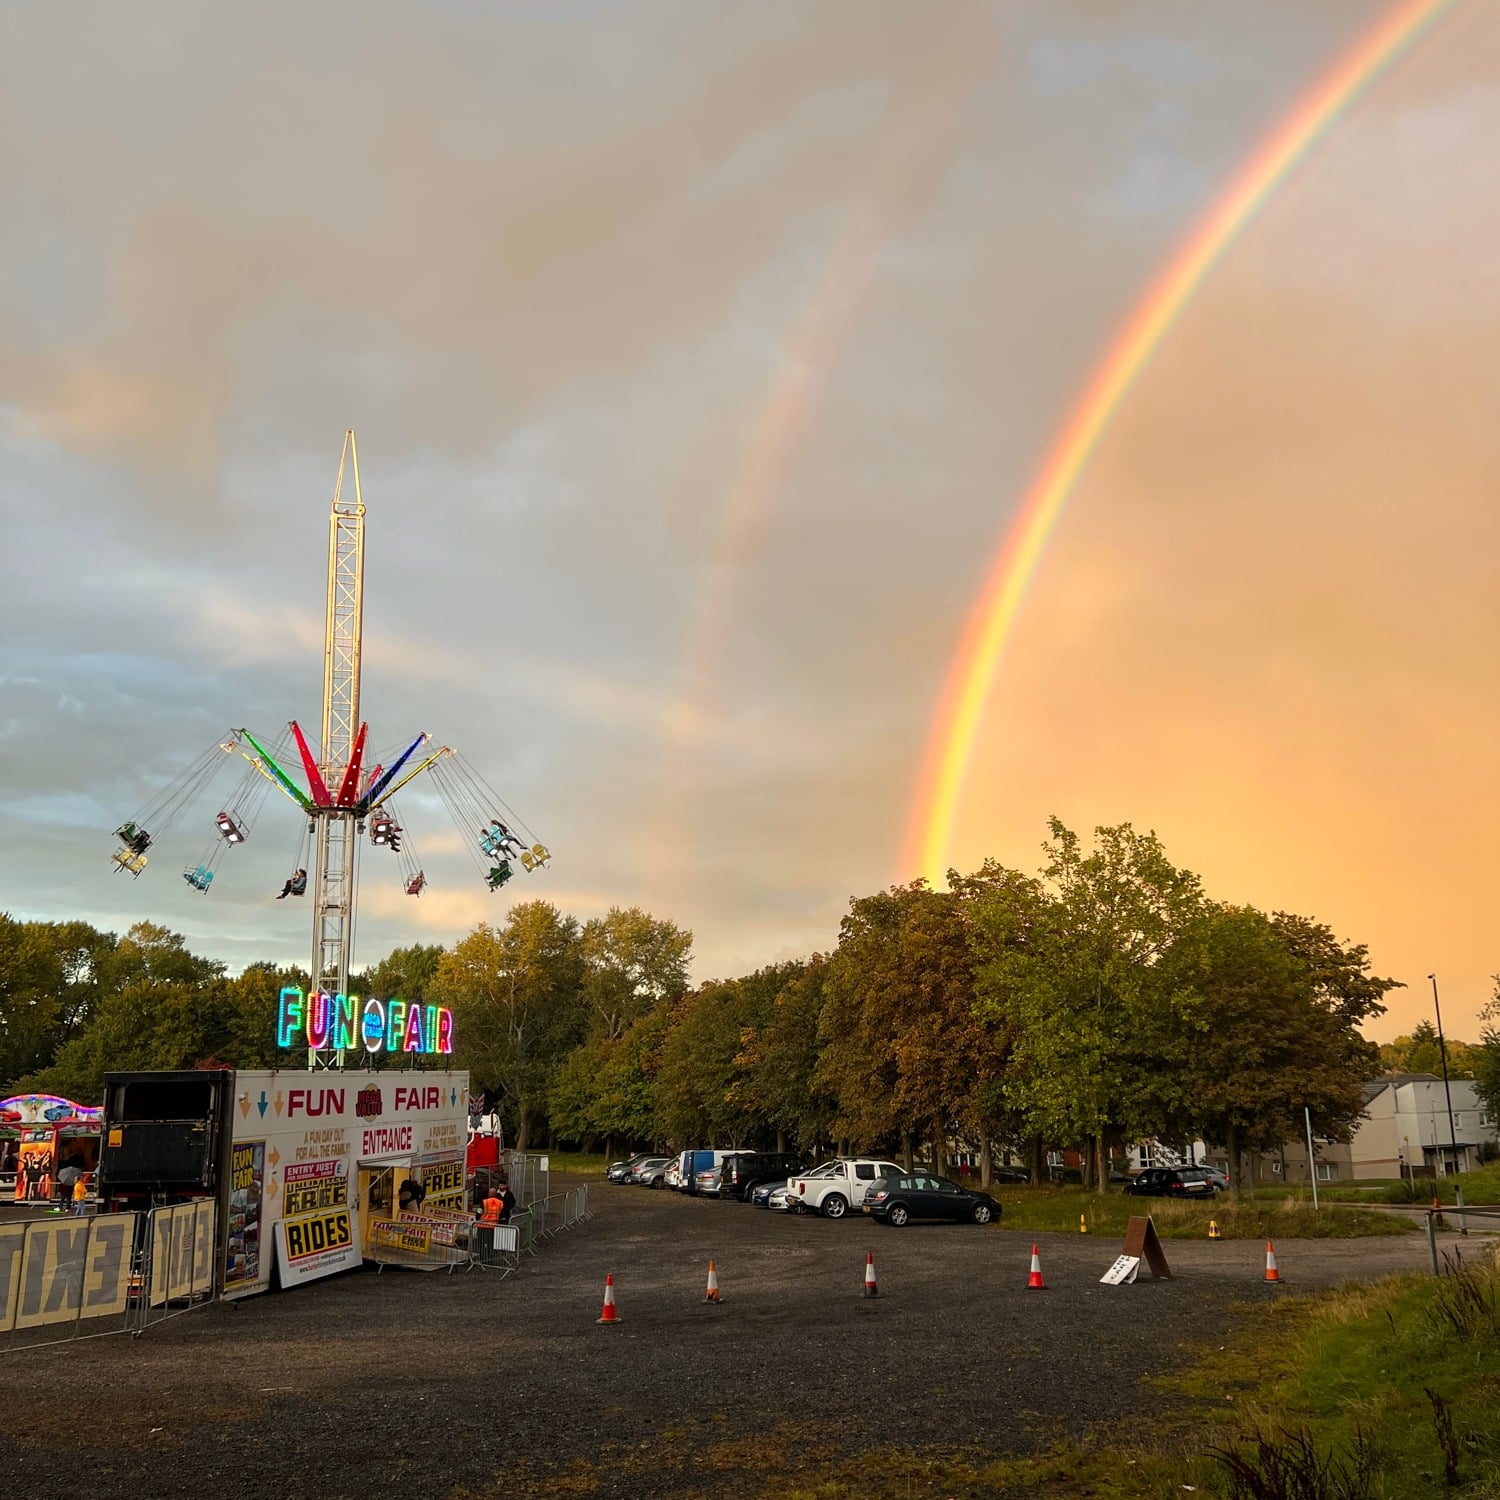 Hannah Platt's photograph, Woodhouse Moor funfair — there's a double rainbow for crying out loud!